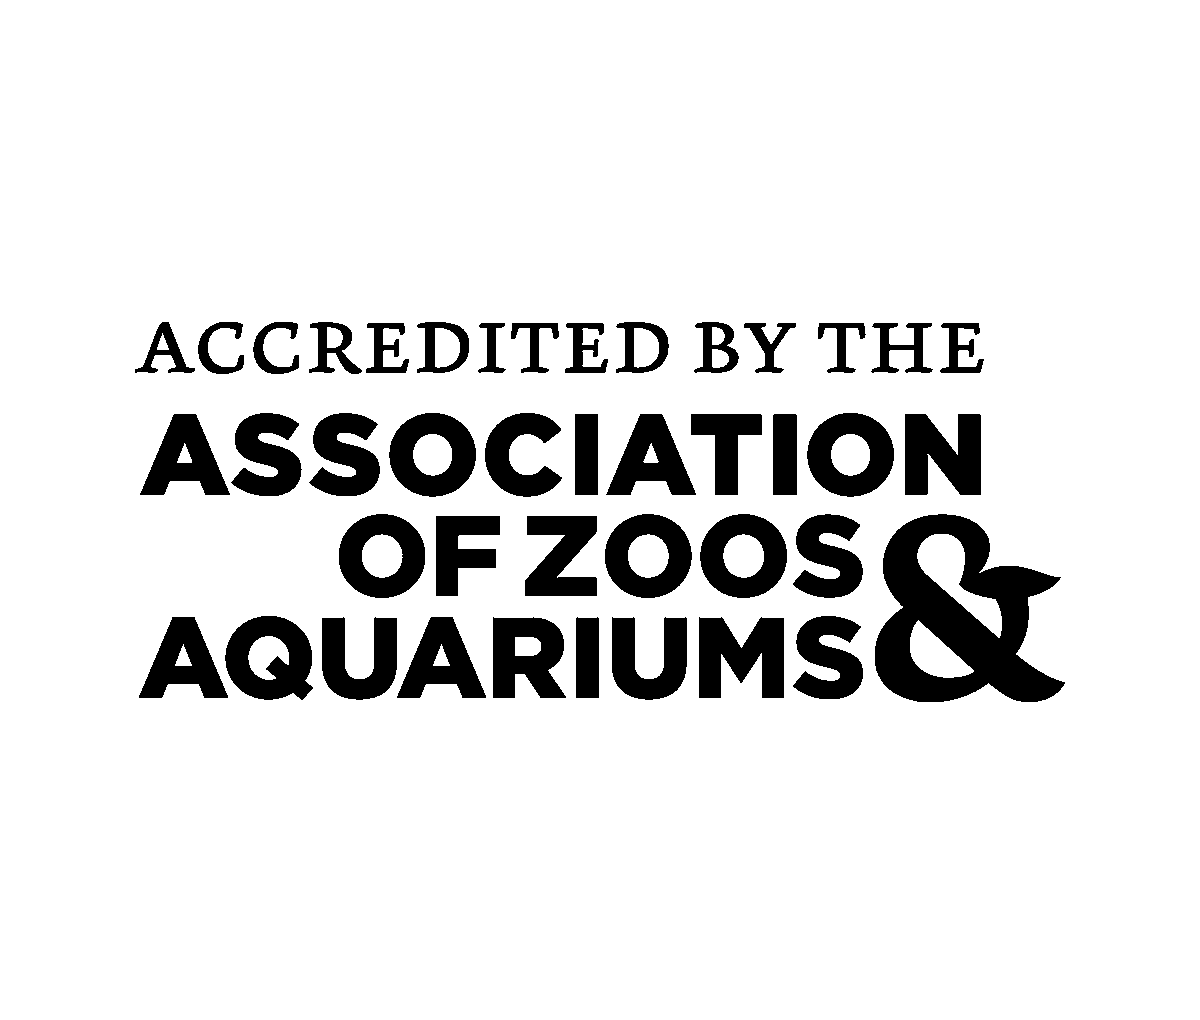 Accredited By The Association of Zoos & Aquariums